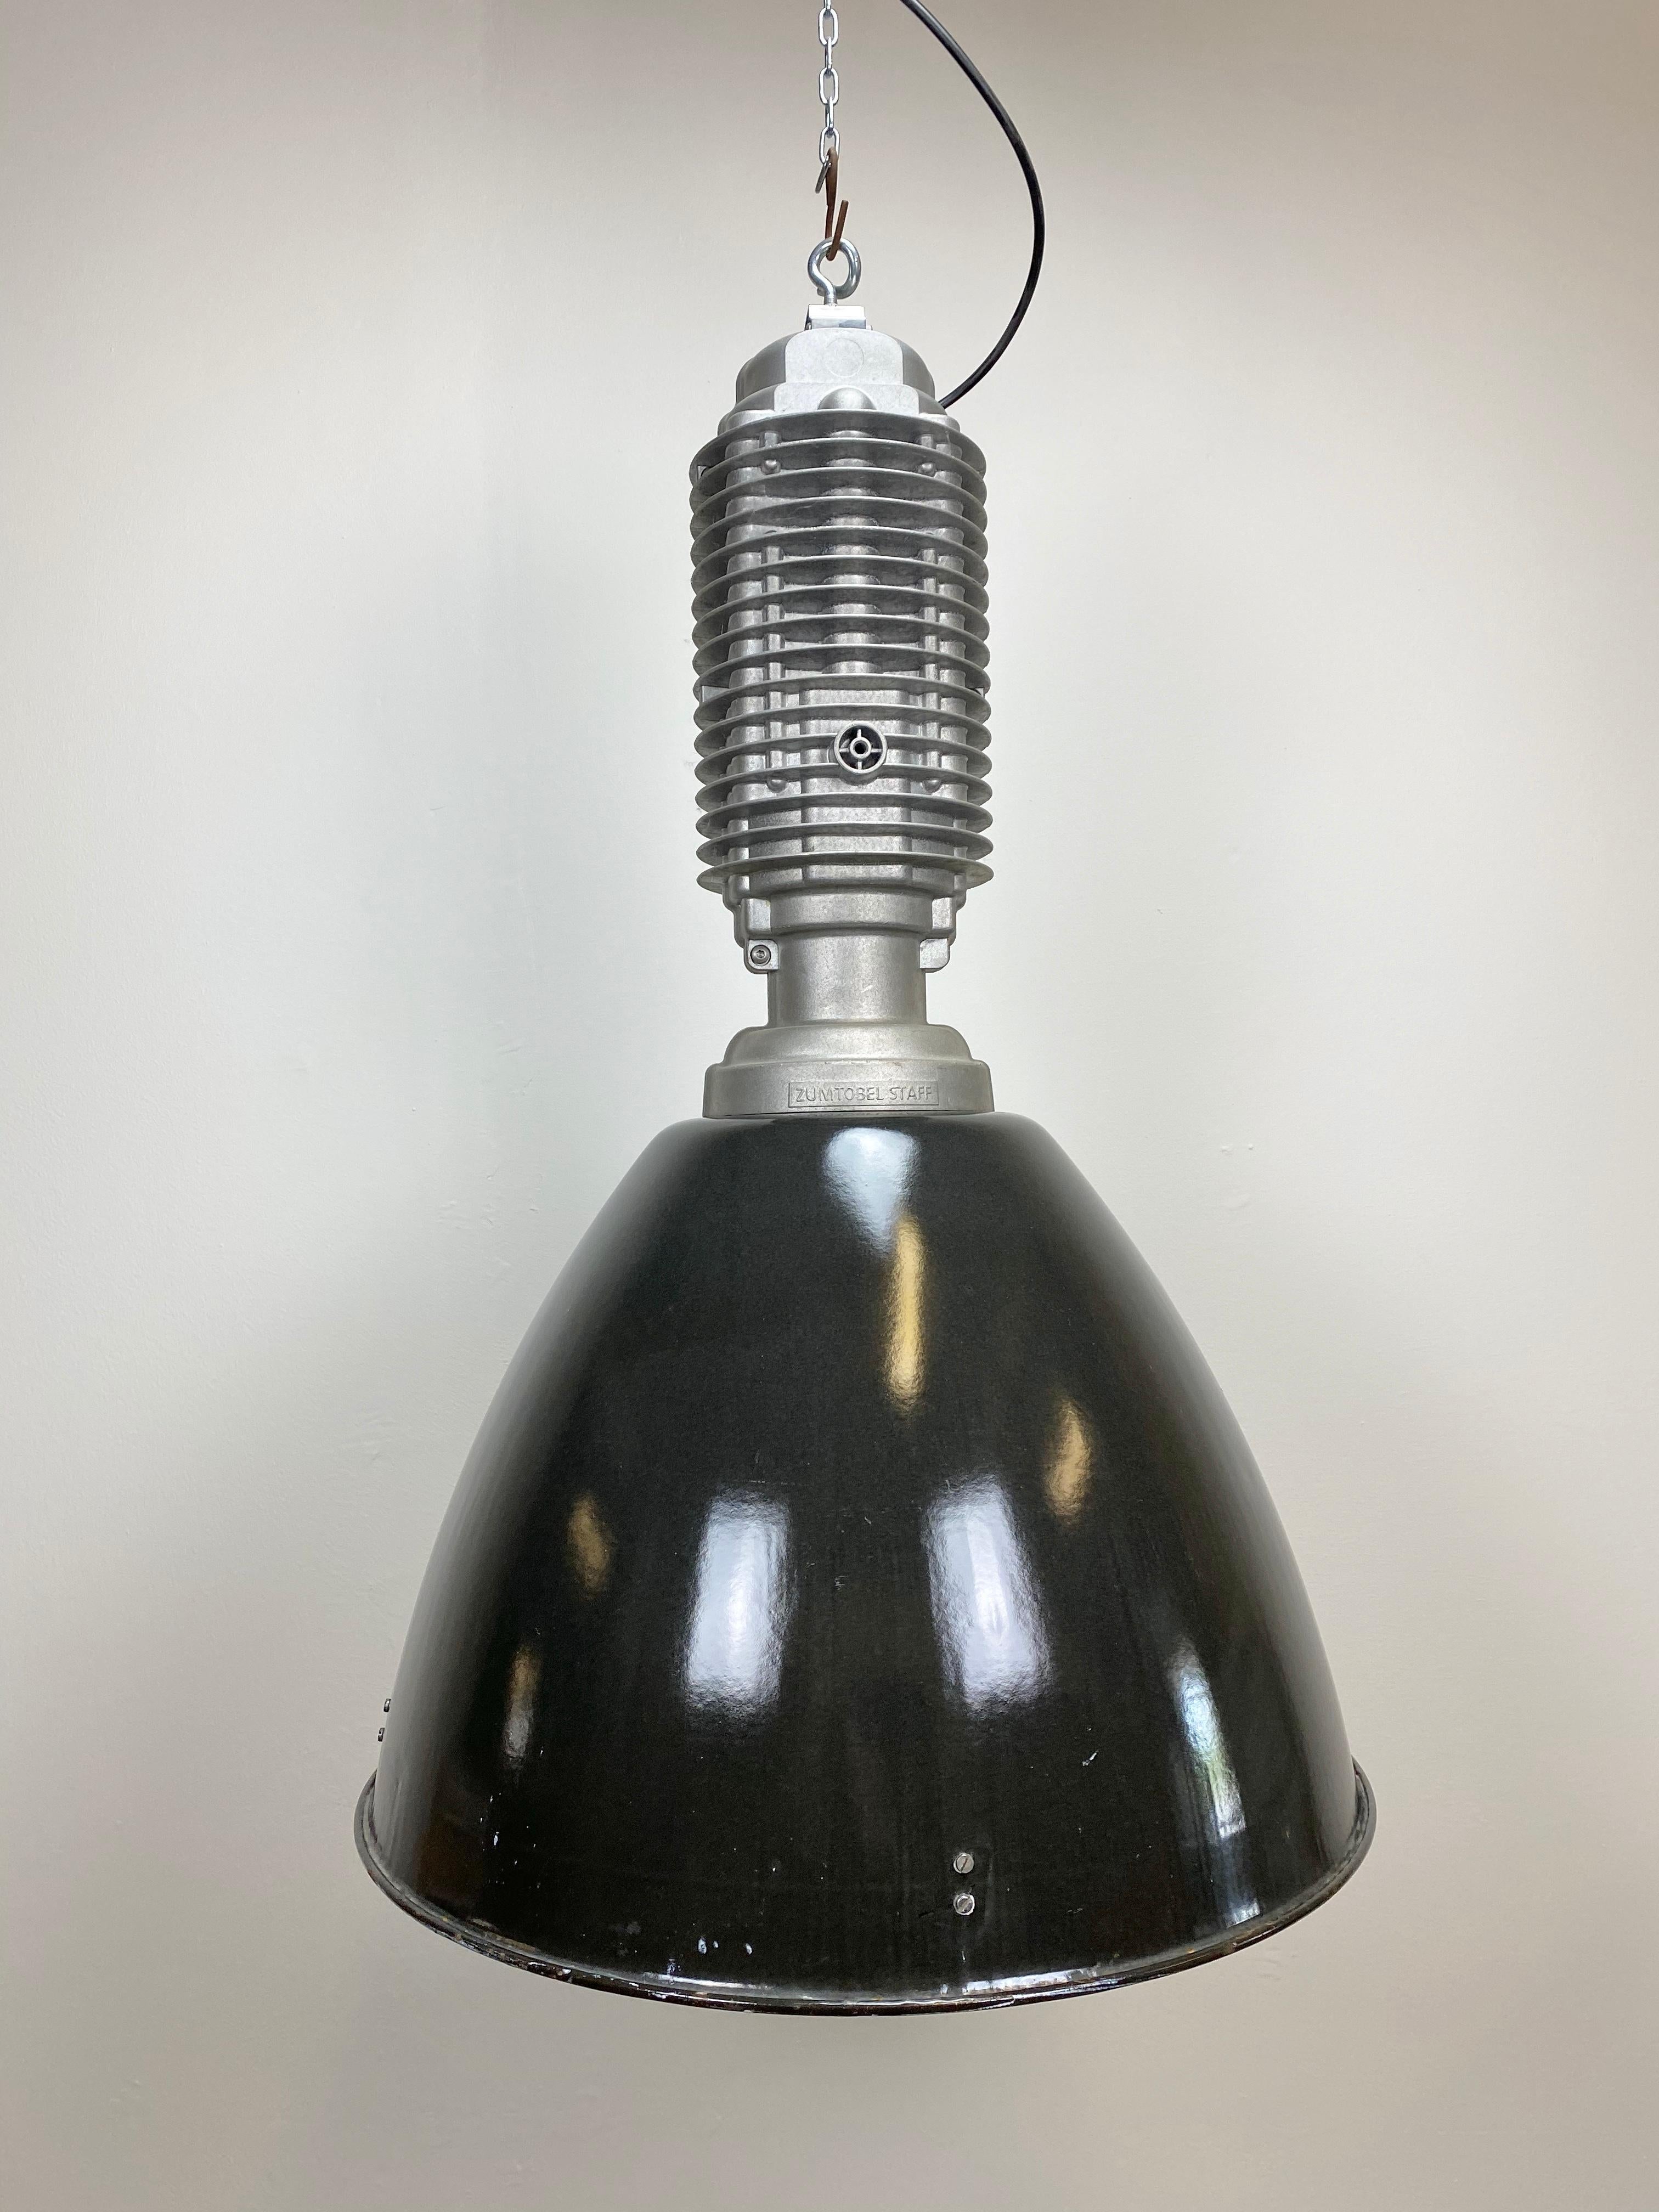 Industrial black enamel hanging lamp. It features cast aluminum top, black enamel shade with white interior, new socket for E 27 light bulbs and new wire. The lamp weighs 8kg.The lampshade diameter is 53 cm.